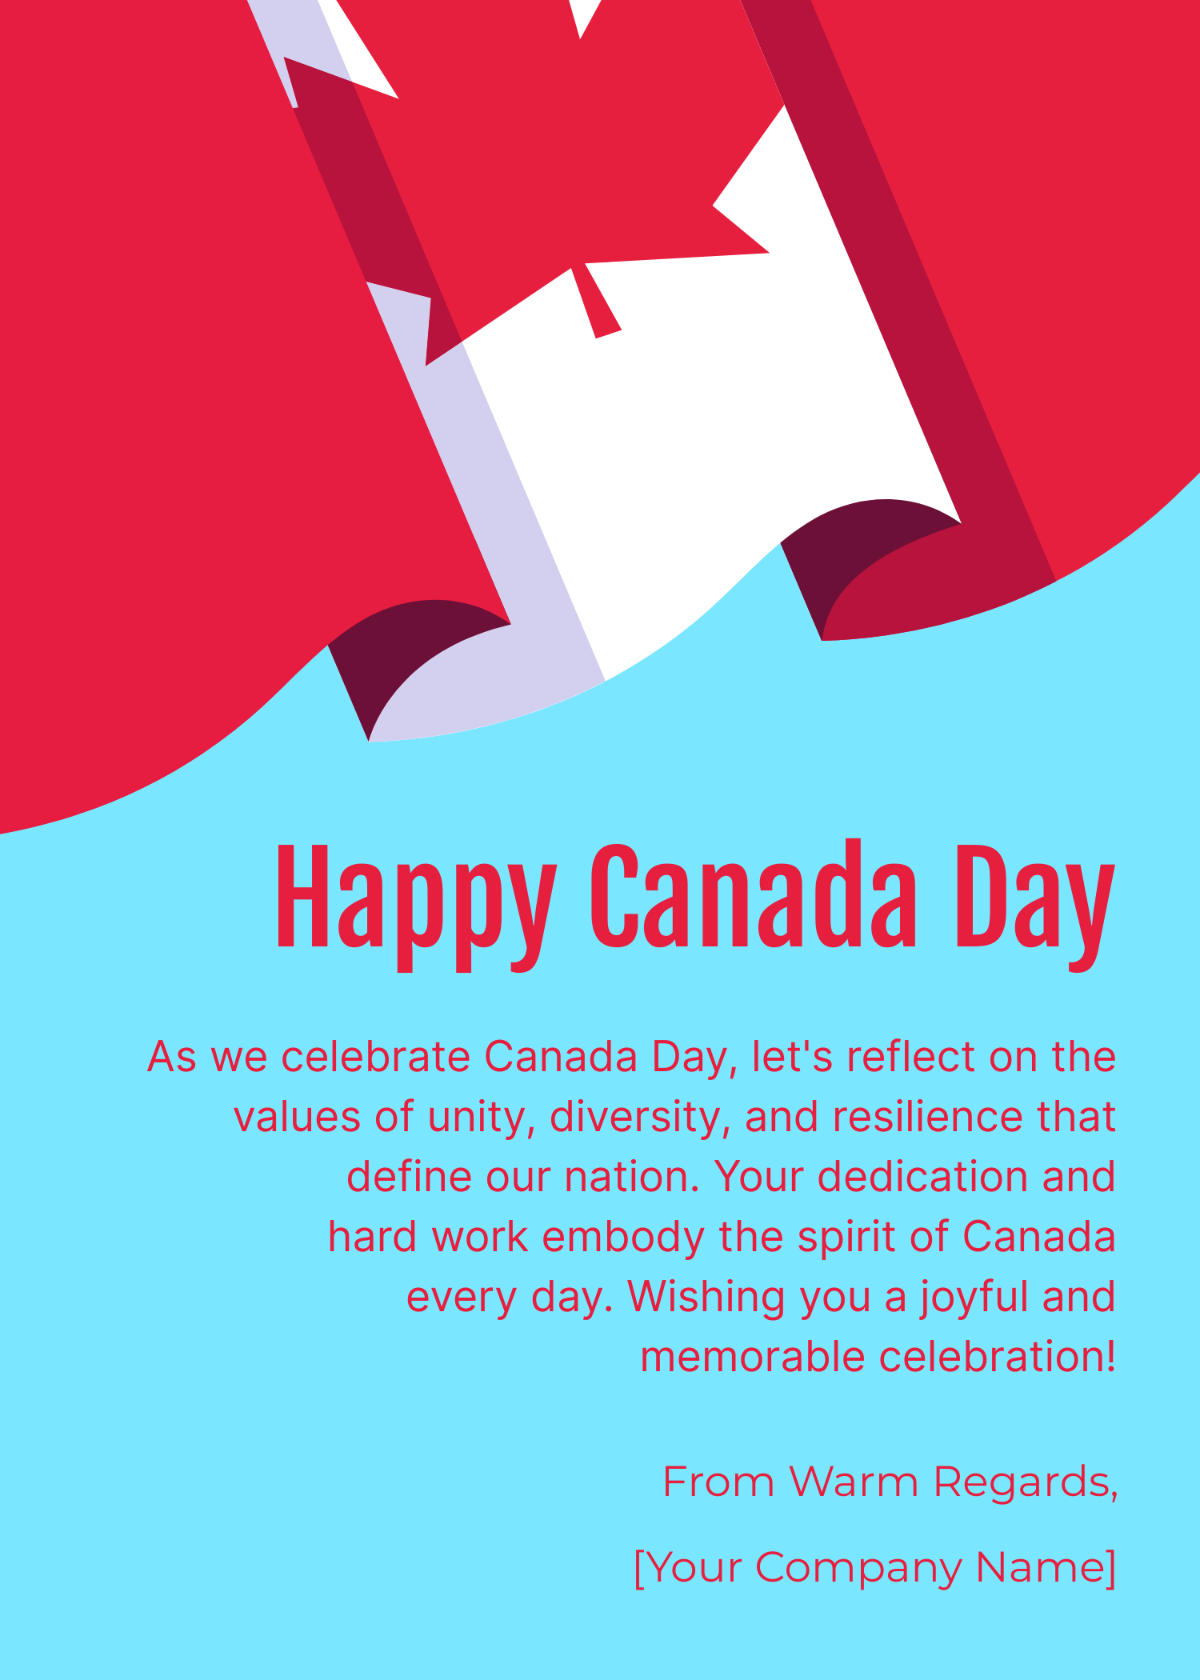 Canada Day Message To Employees